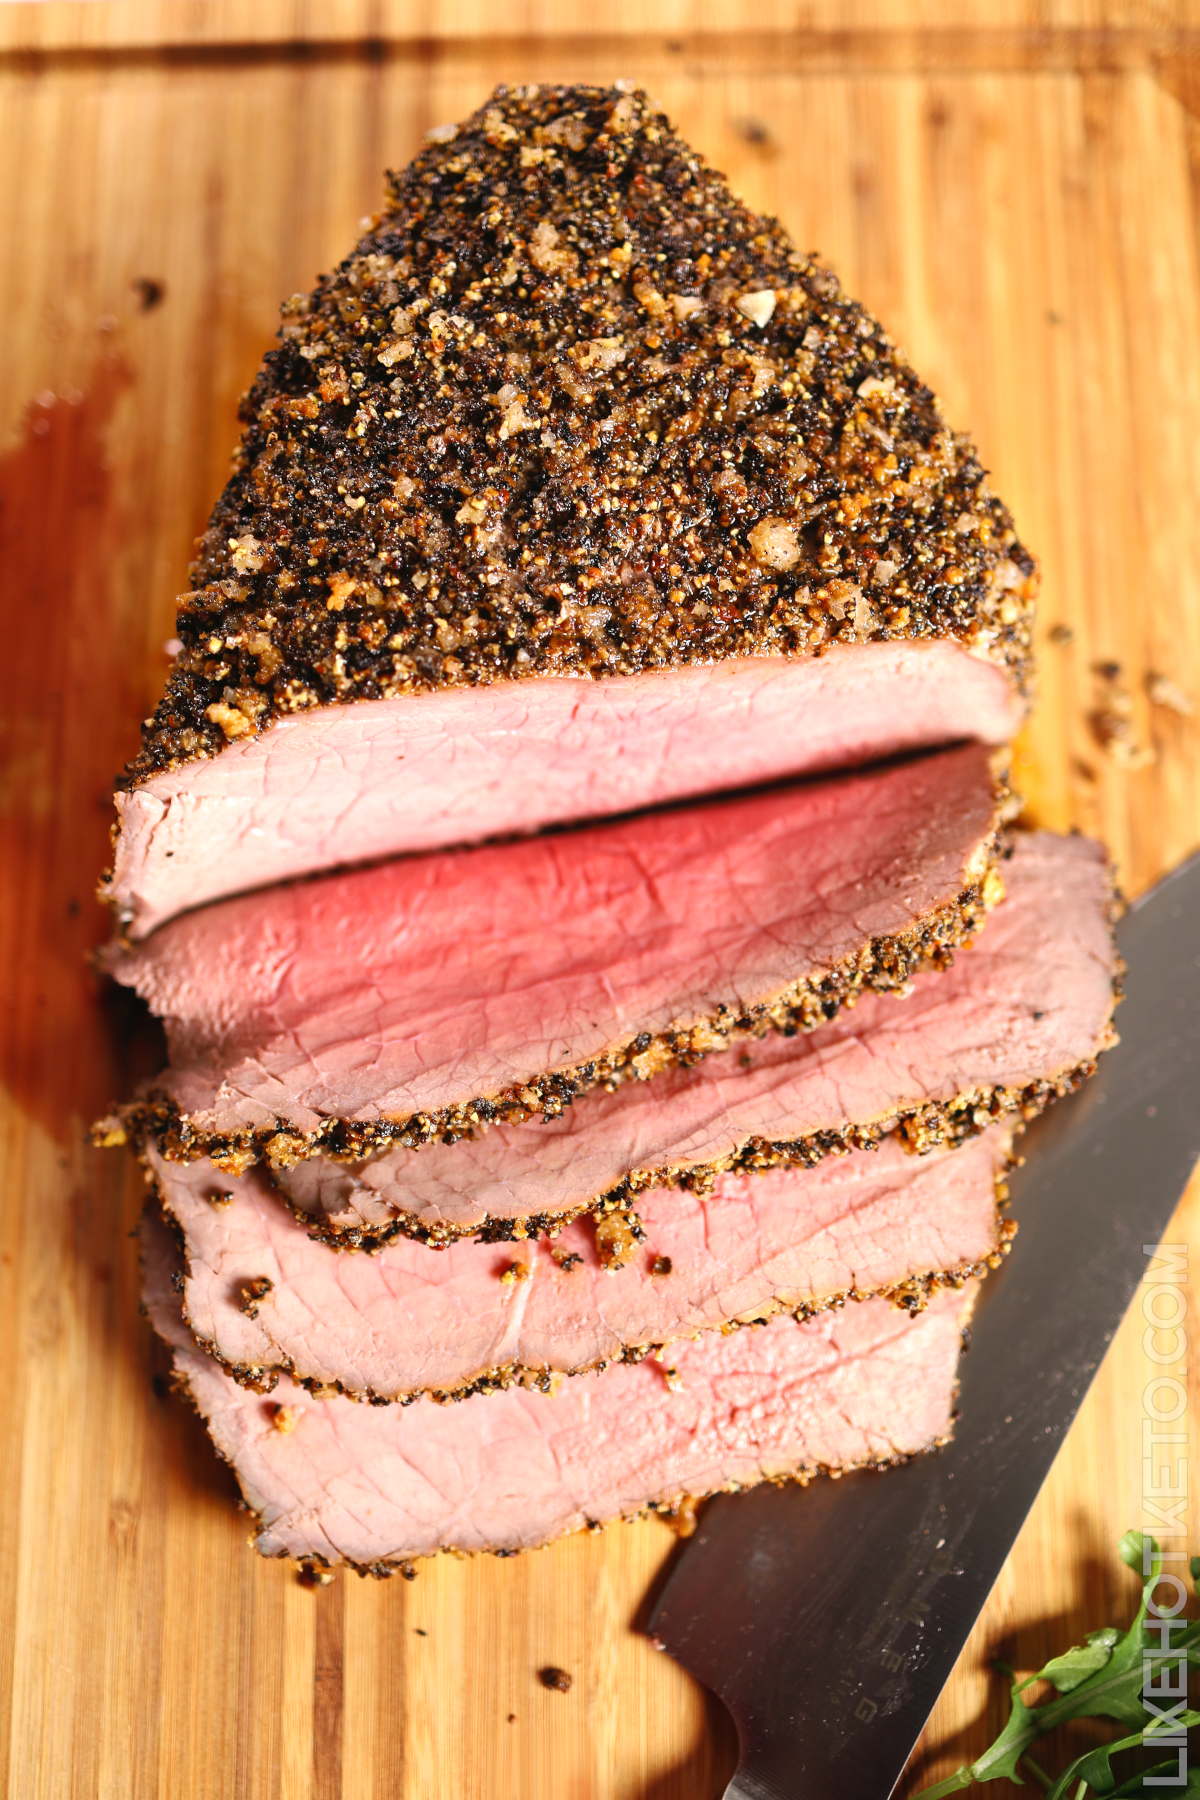 Half sliced roasted beef with thick crushed peppercorn crust,  on a wooden board next to cutting knife.